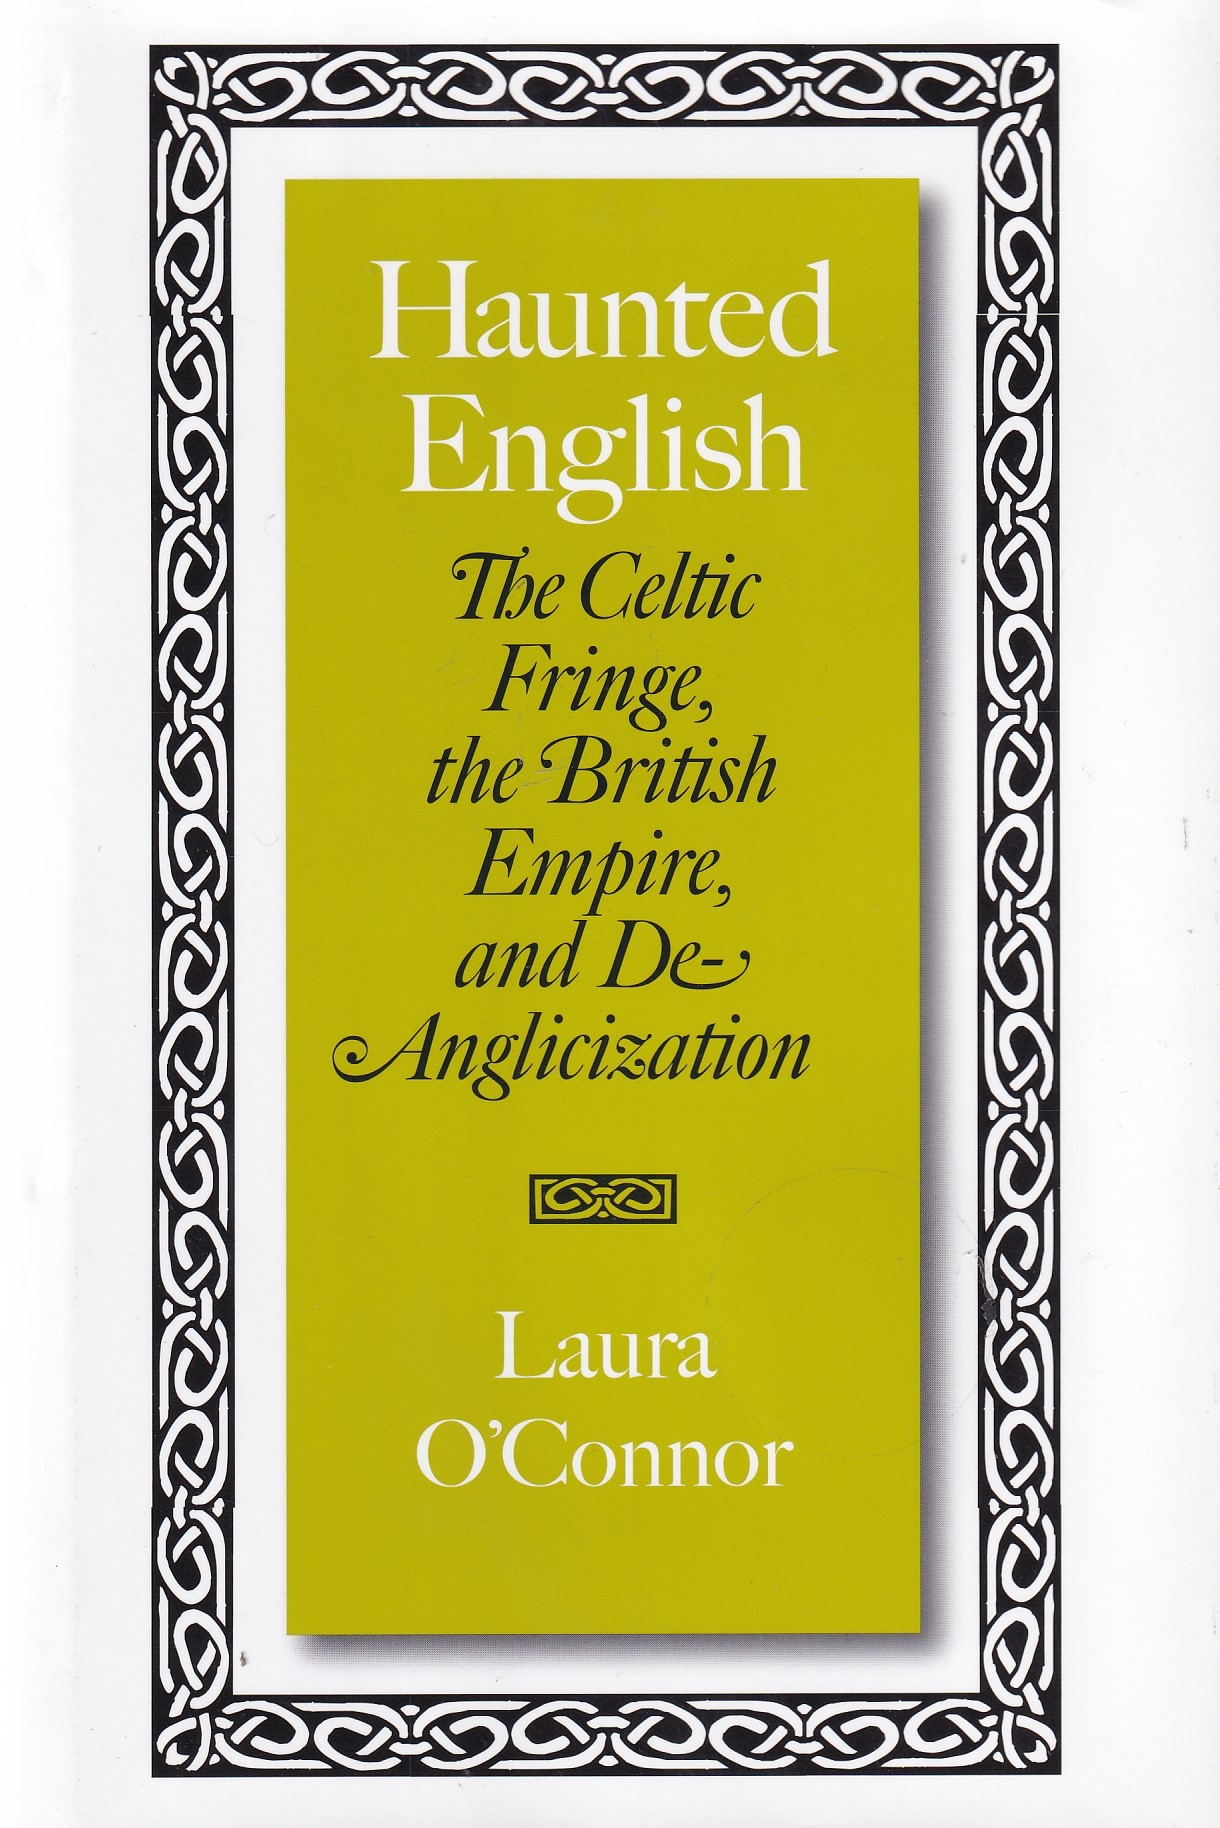 Haunted English: The Celtic Fringe, the British Empire, and De-Anglicization by Laura O'Connor